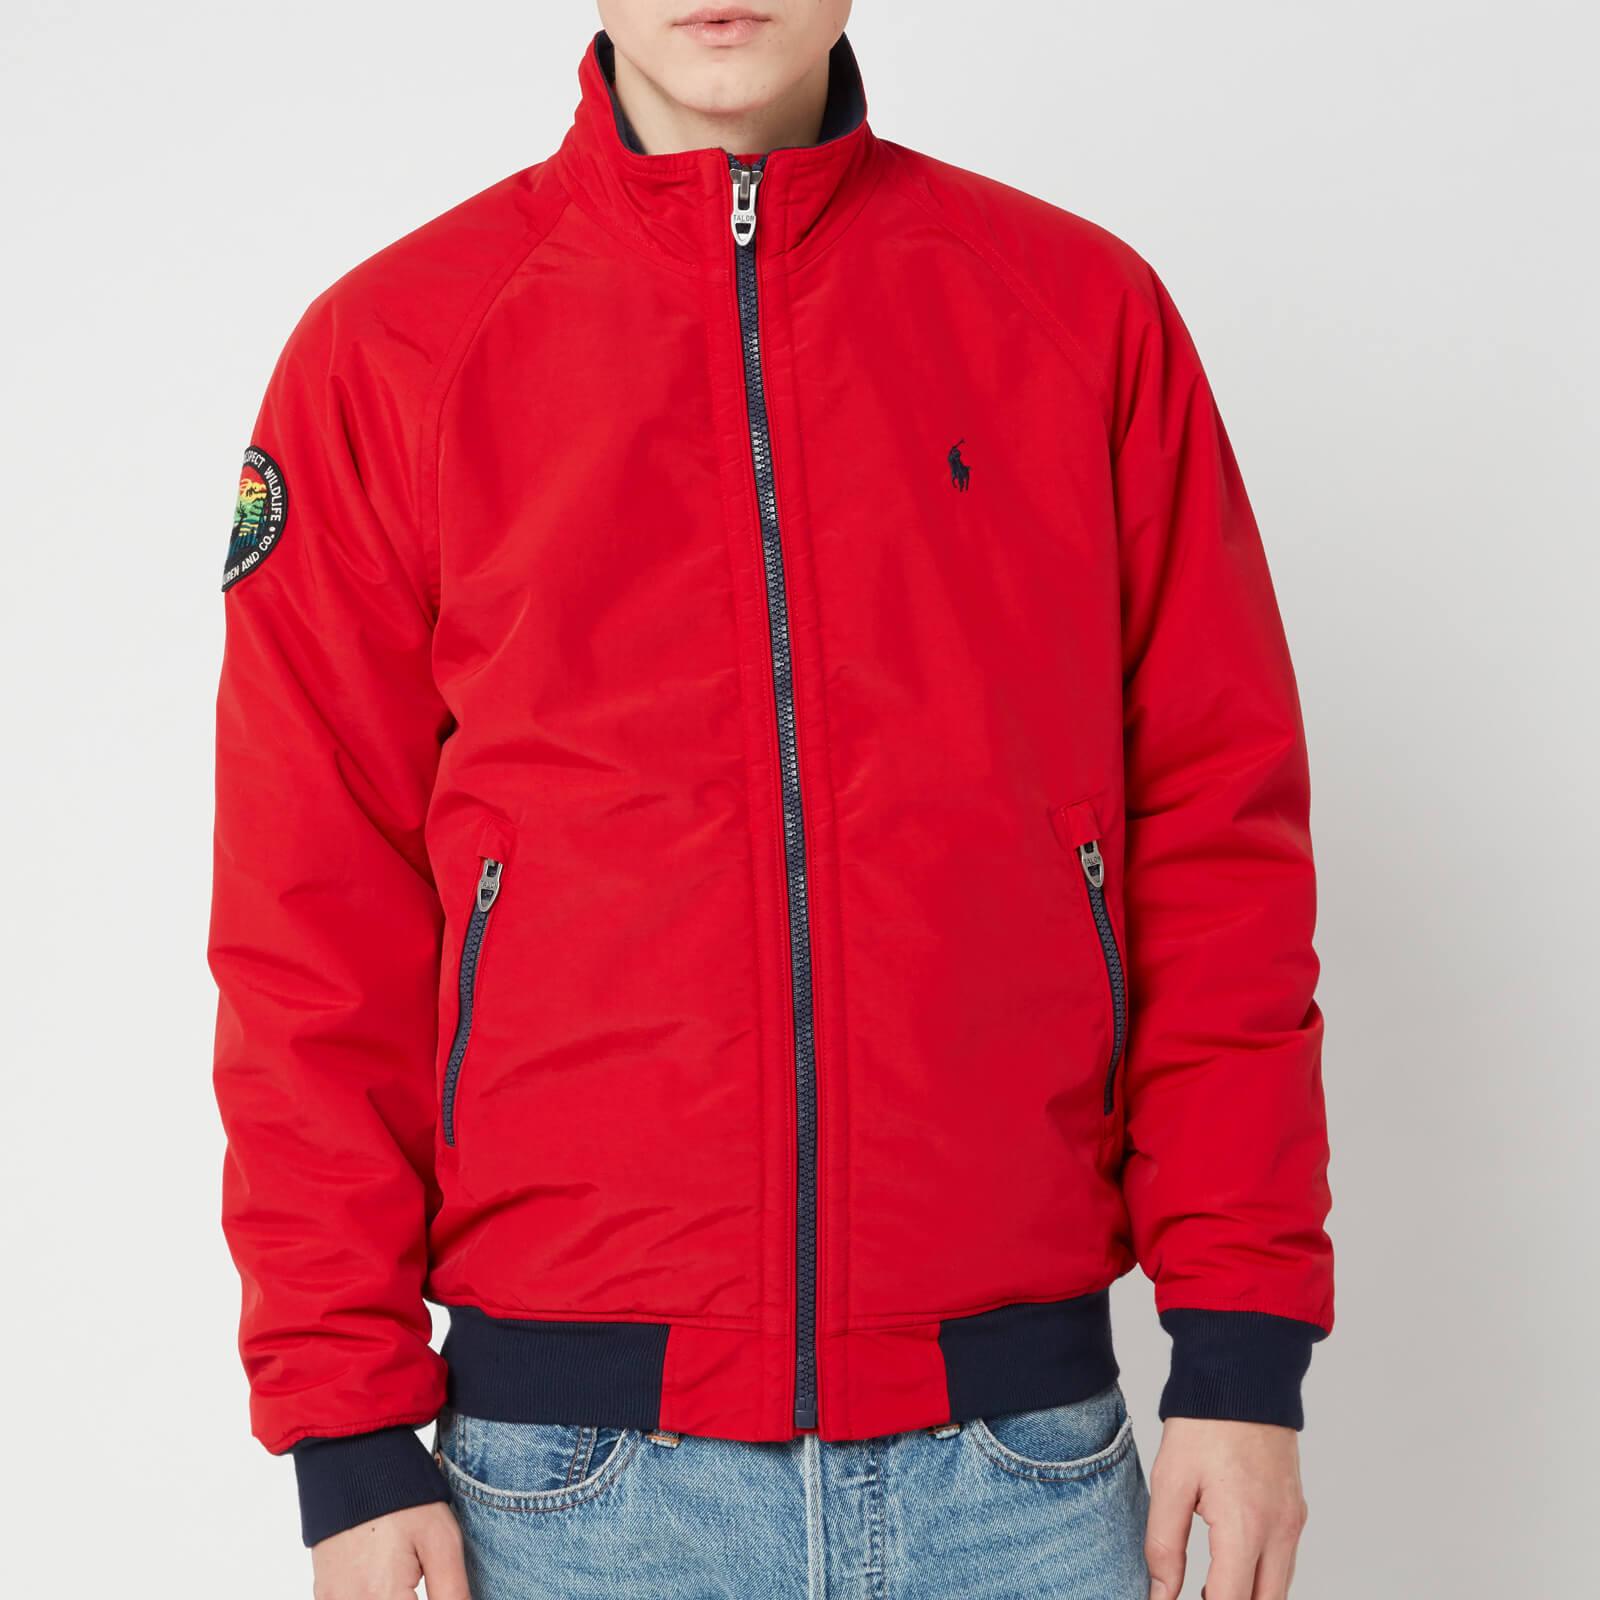 Polo Ralph Lauren Bomber Portage Jacket in Red for Men - Lyst